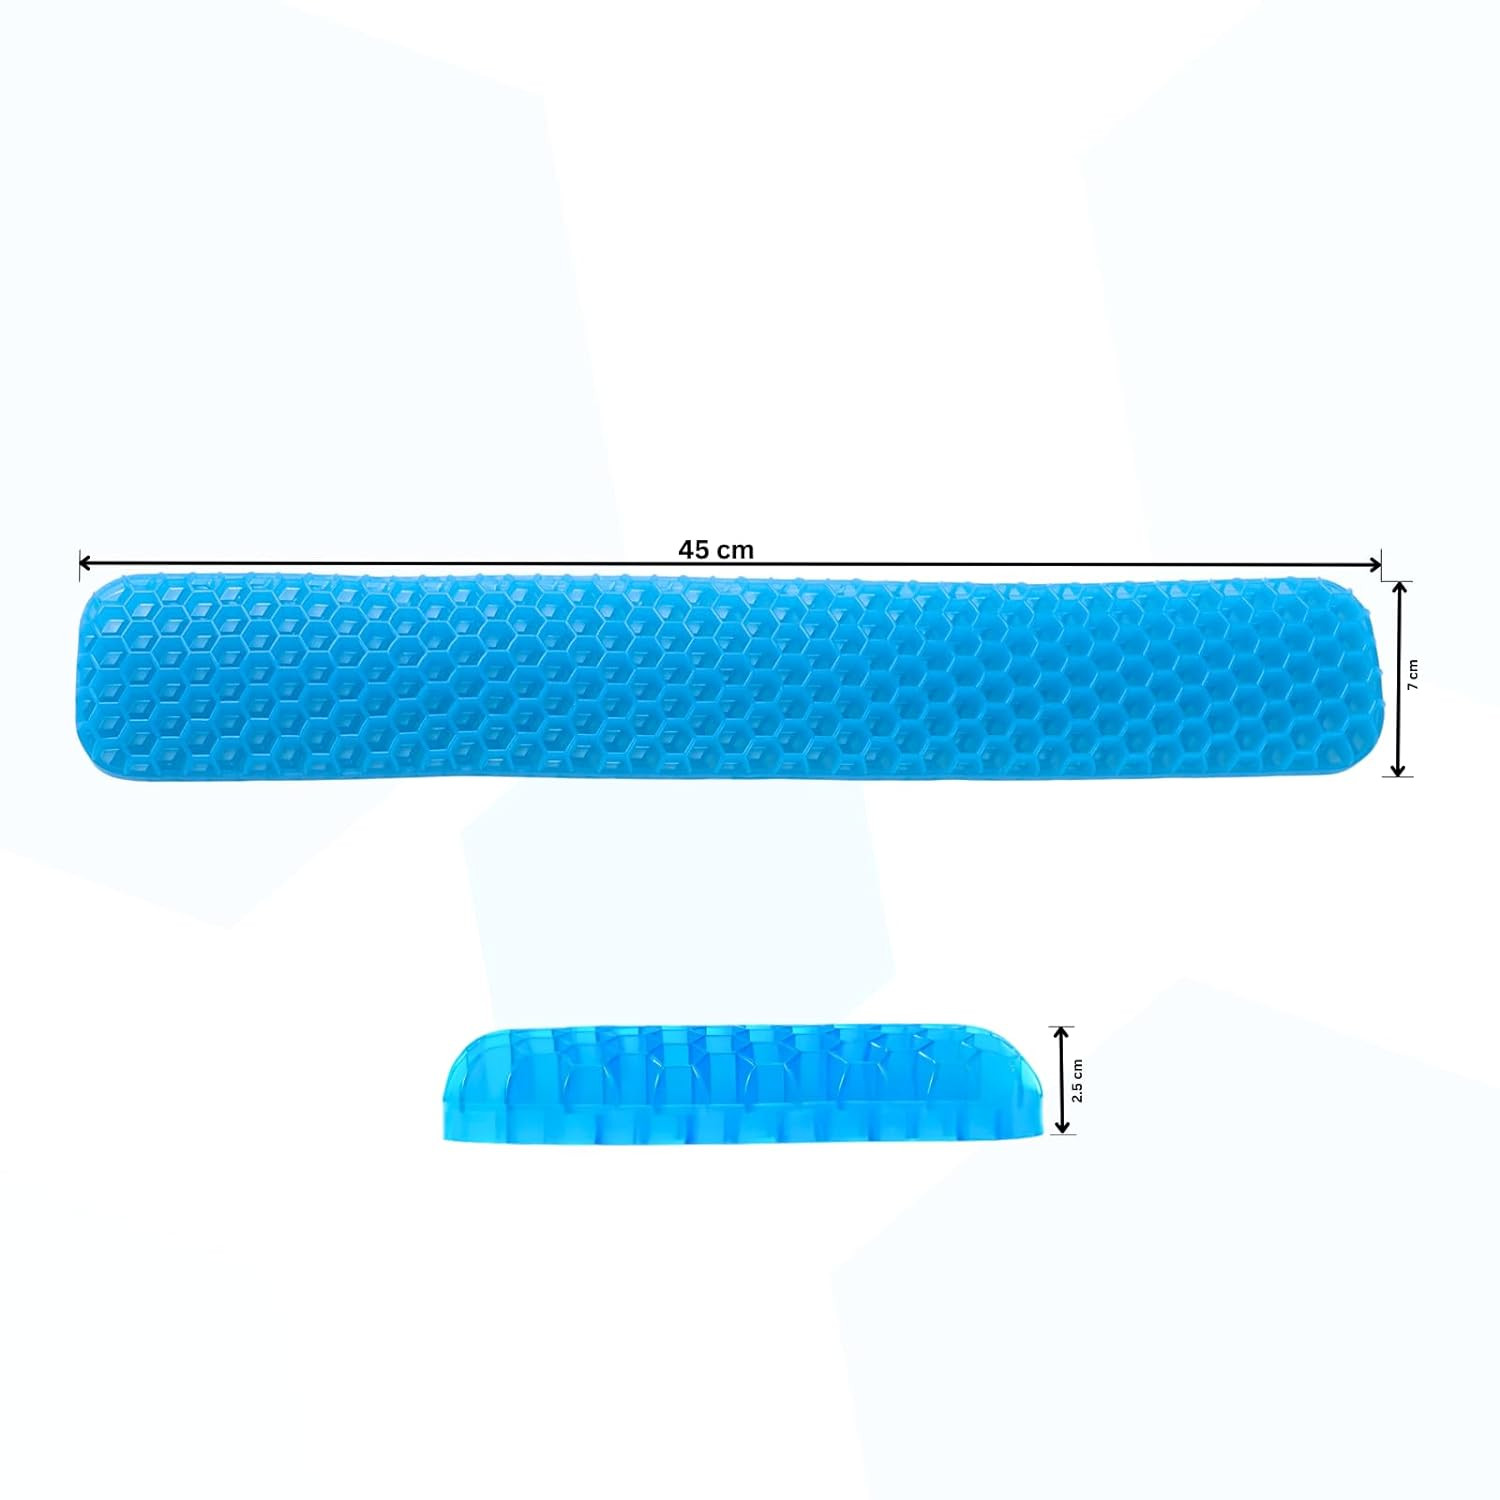 Kuber Industries Keyboard Wrist Pad | Mouse Wrist Pad | Non-Slip Bottom Wrist Pad | Relieve Wrist Pain and Fatigue | Ideal for Typing and Gaming | TD001-TD002 | Pack of 2 | Blue